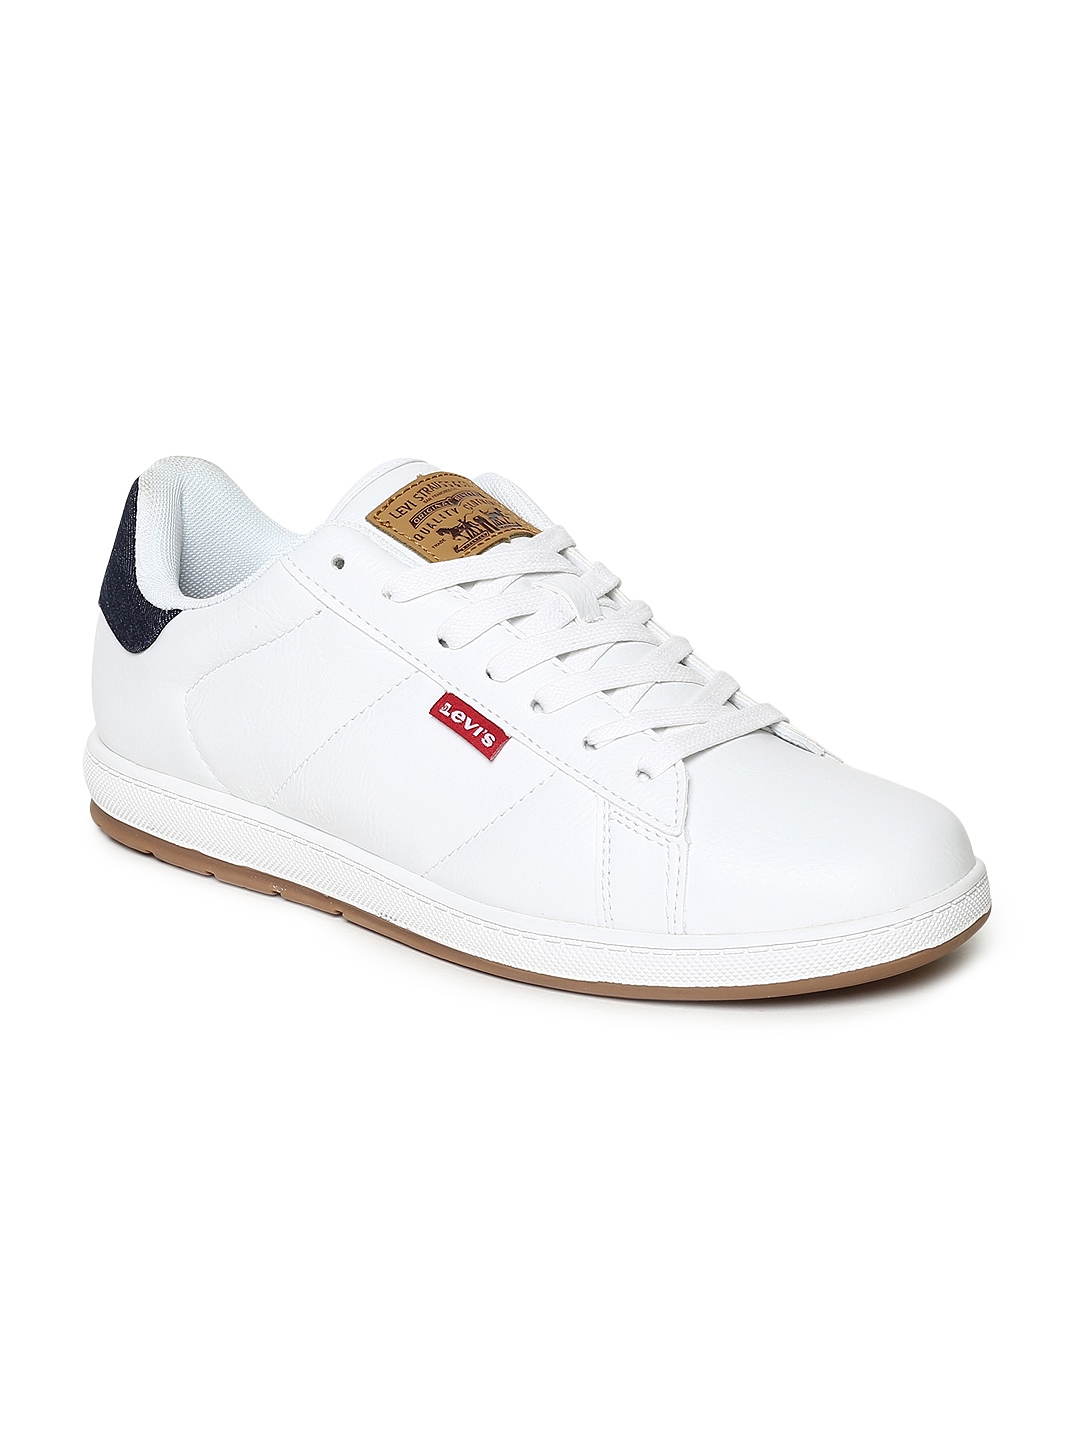 Buy Levis Men White Sneakers - Casual Shoes for Men 8859629 | Myntra